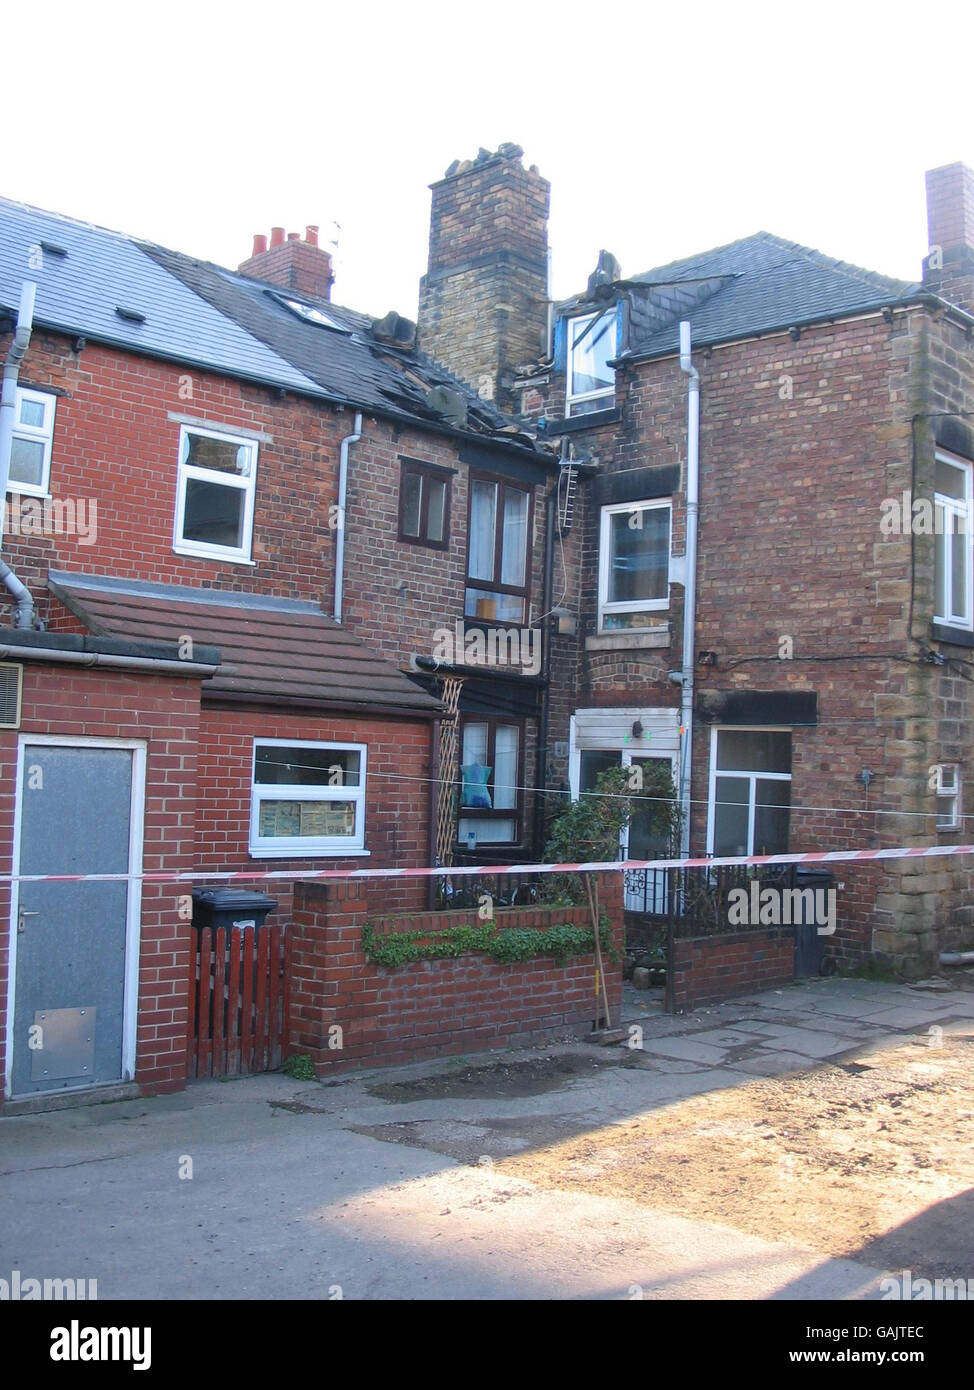 The house in Barnsley Road, Wombwell where a man required hospital treatment after a chimney collapsed and fell into his bedroom after earthquake with a magnitude of 5.2 (ML) on the Richter scale near Market Rasen, Lincolnshire at 00:56 GMT. Stock Photo